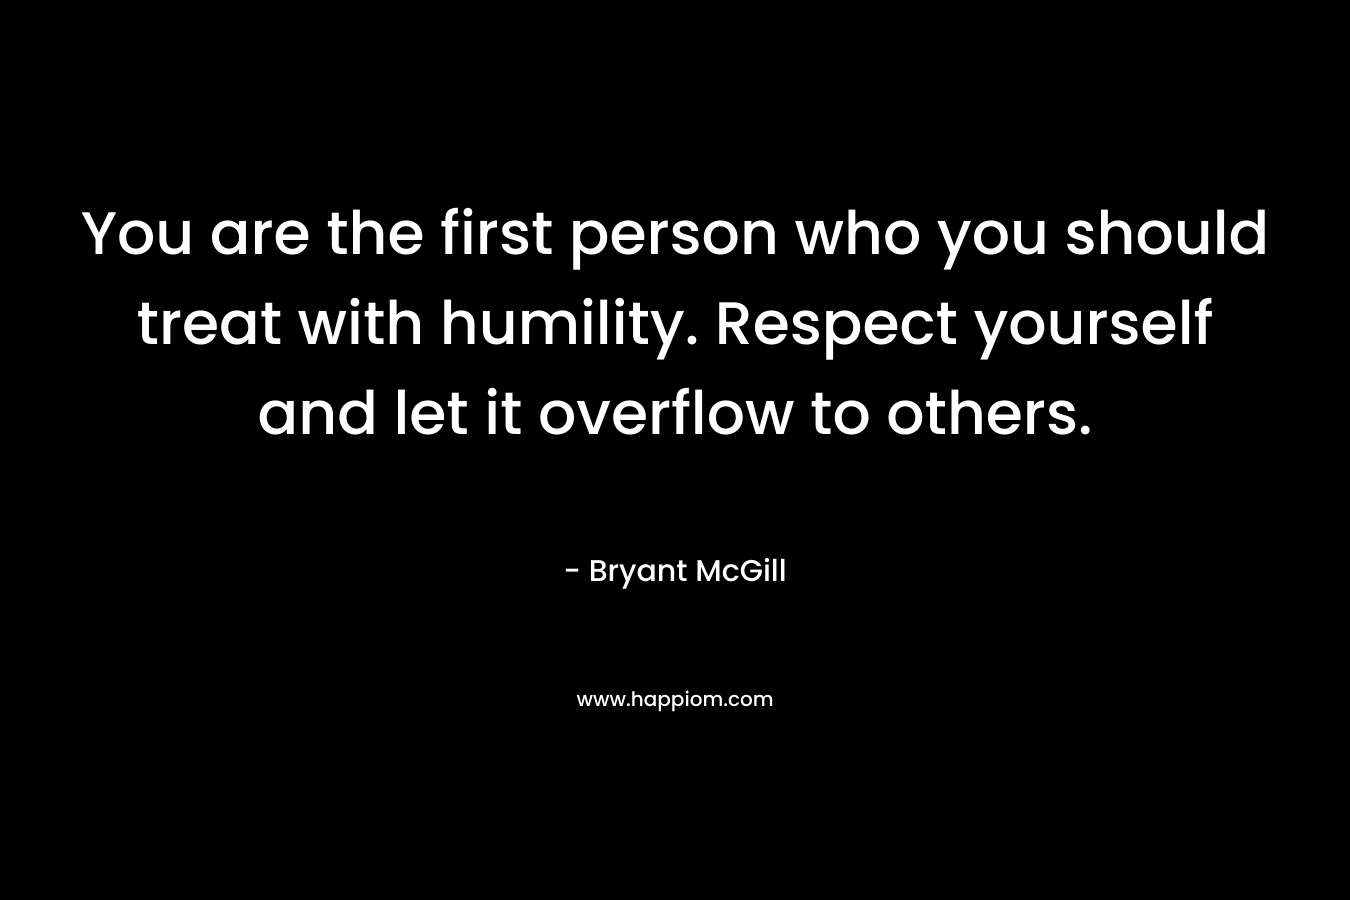 You are the first person who you should treat with humility. Respect yourself and let it overflow to others.